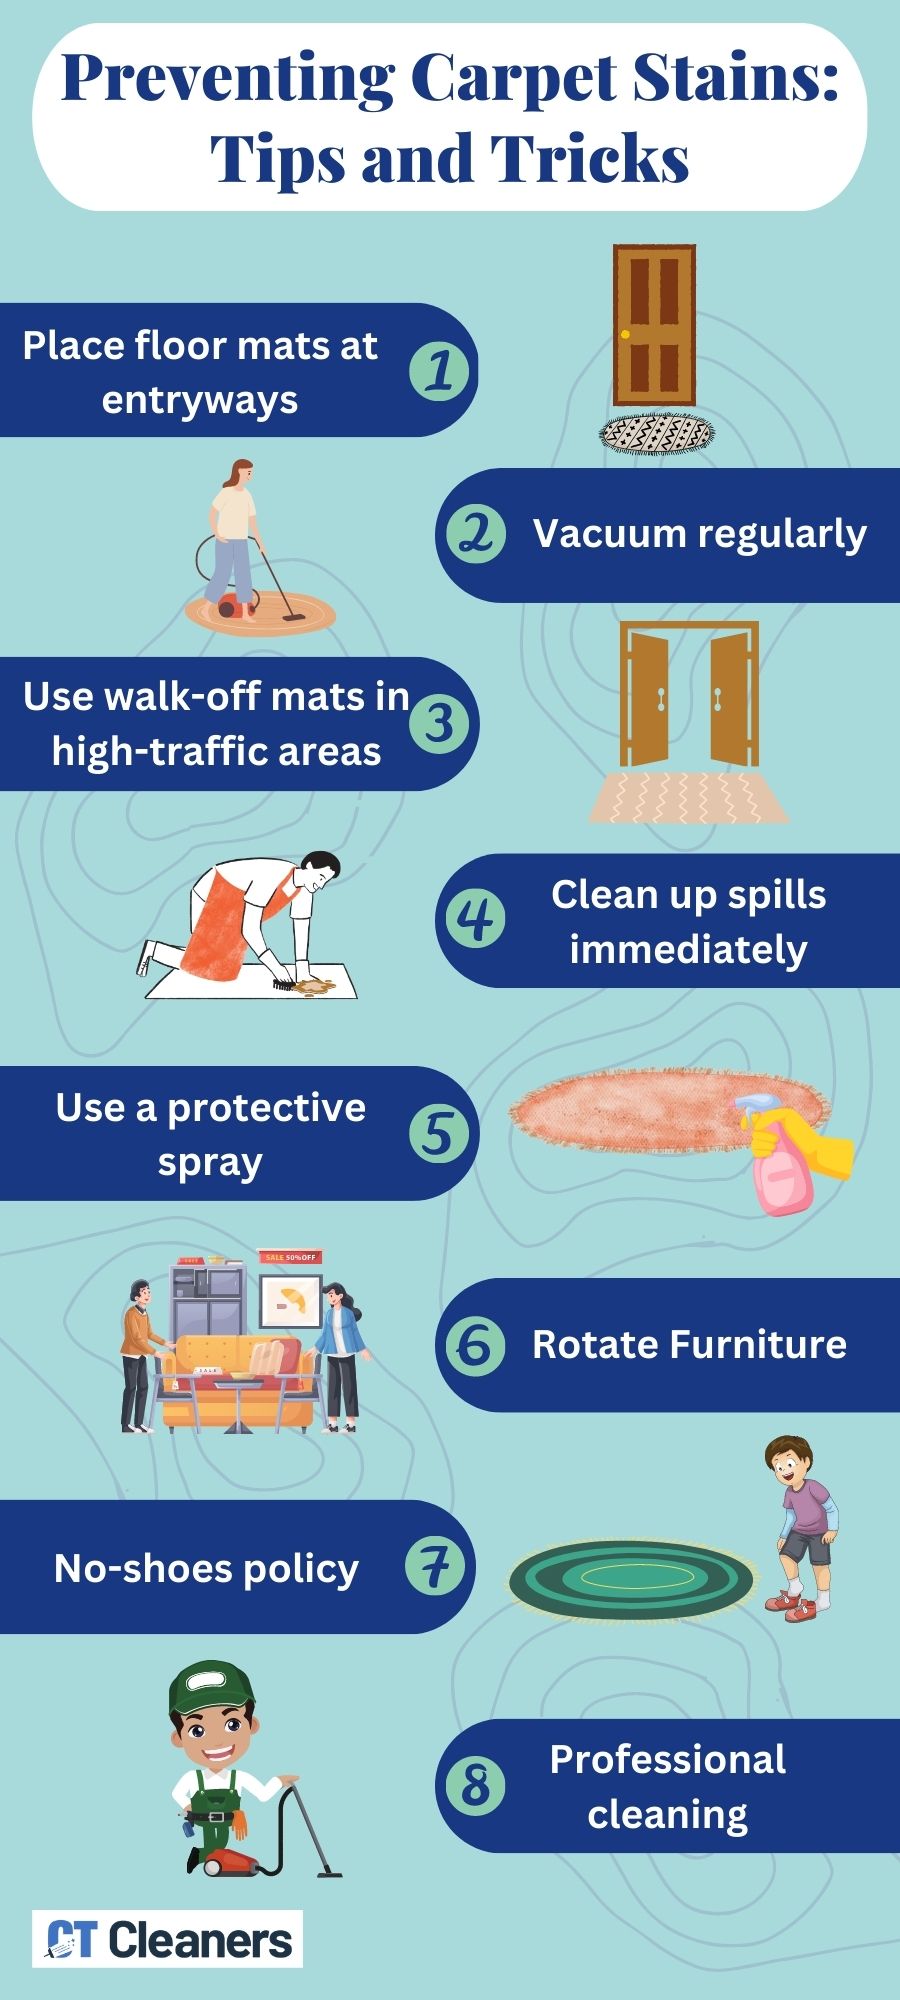 Preventing Carpet Stains Tips and Tricks